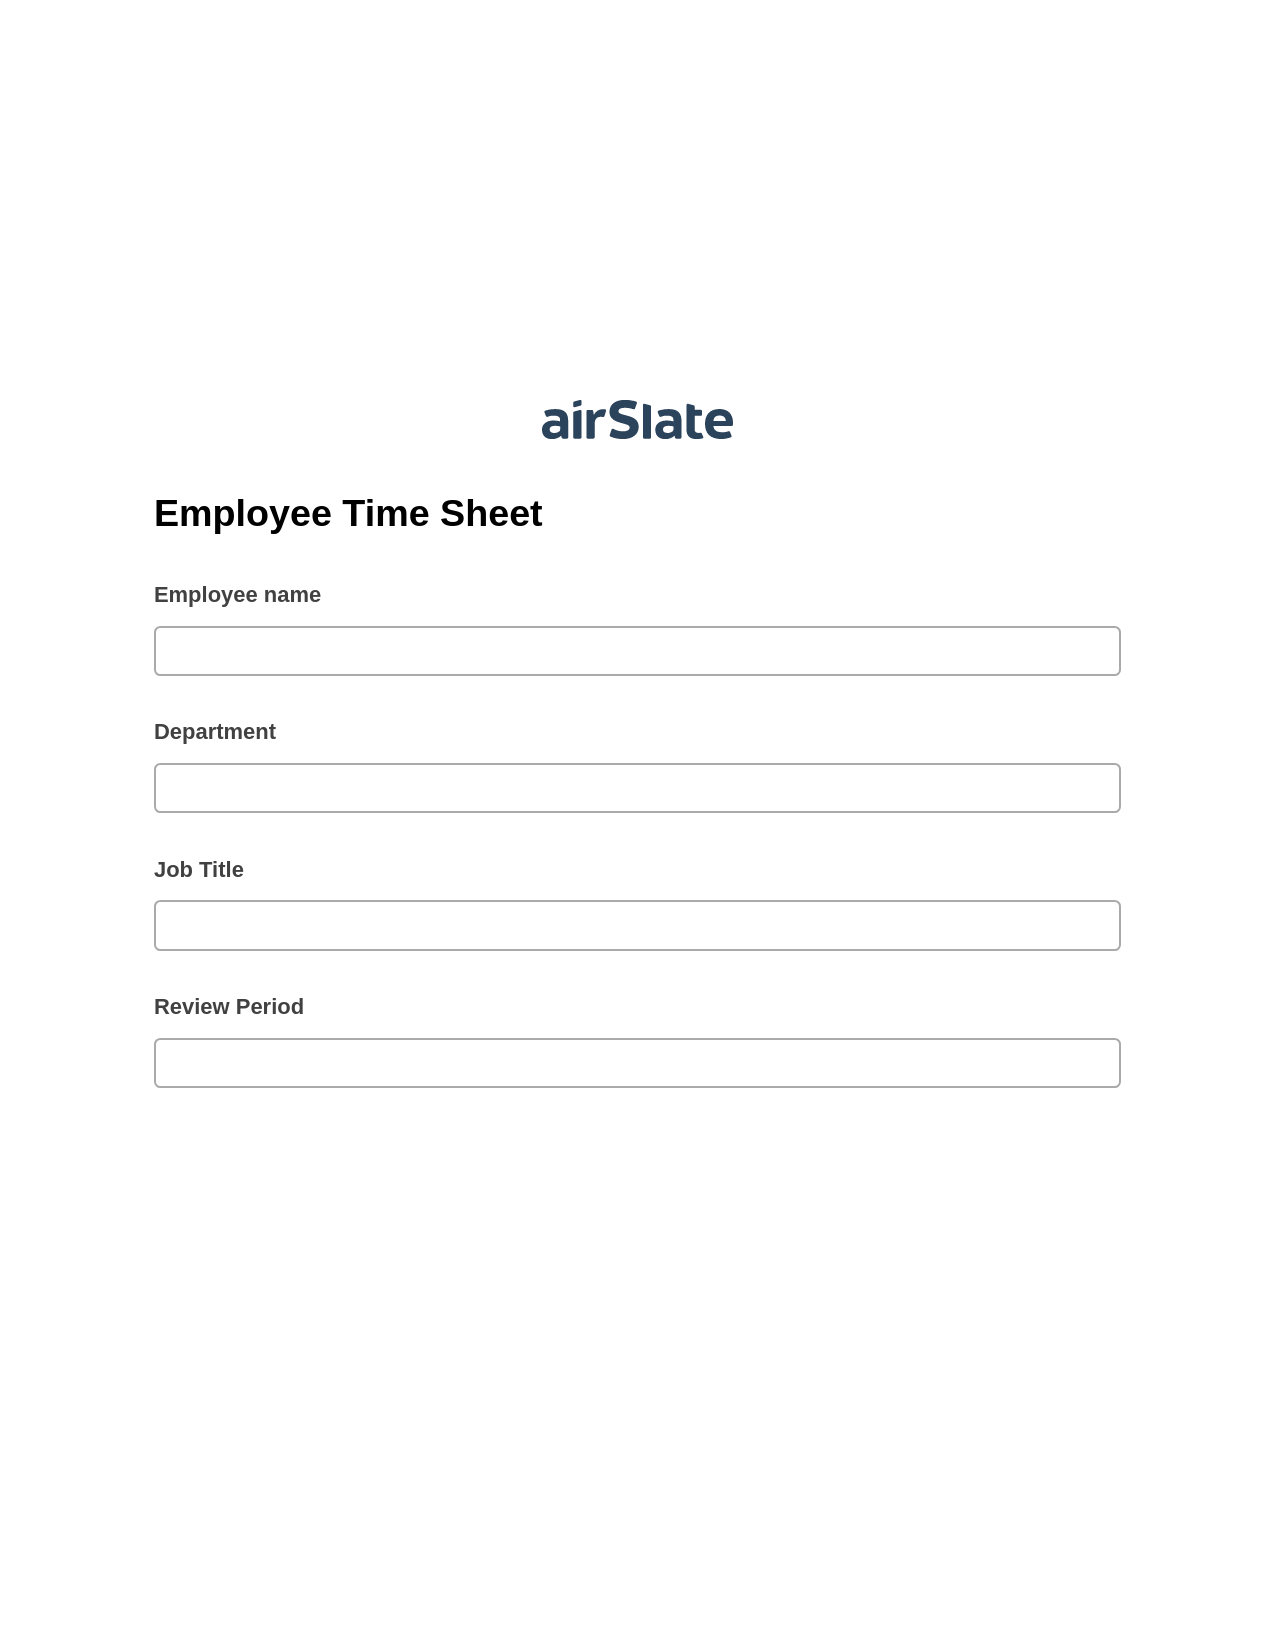 Employee Time Sheet Pre-fill from Excel Spreadsheet Bot, Lock the Slate Bot, Export to Google Sheet Bot